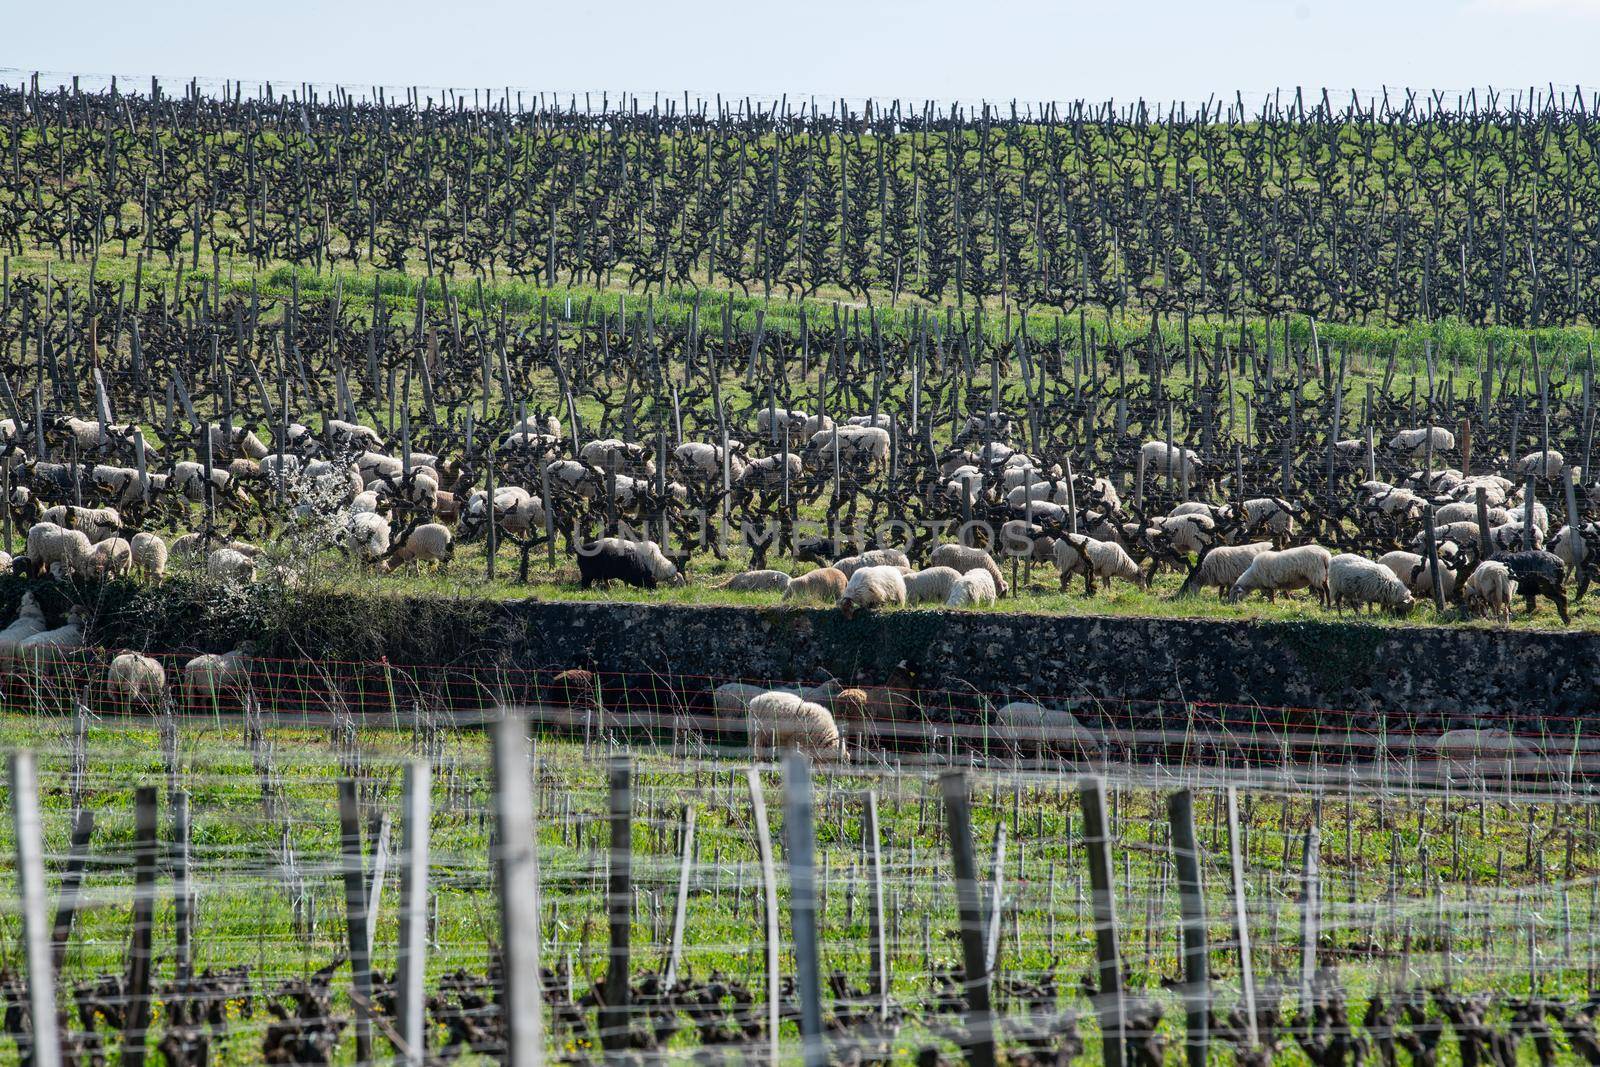 Domestic sheeps grazing in the Bordeaux vineyards, Sauternes, France, France. High quality 4k footage